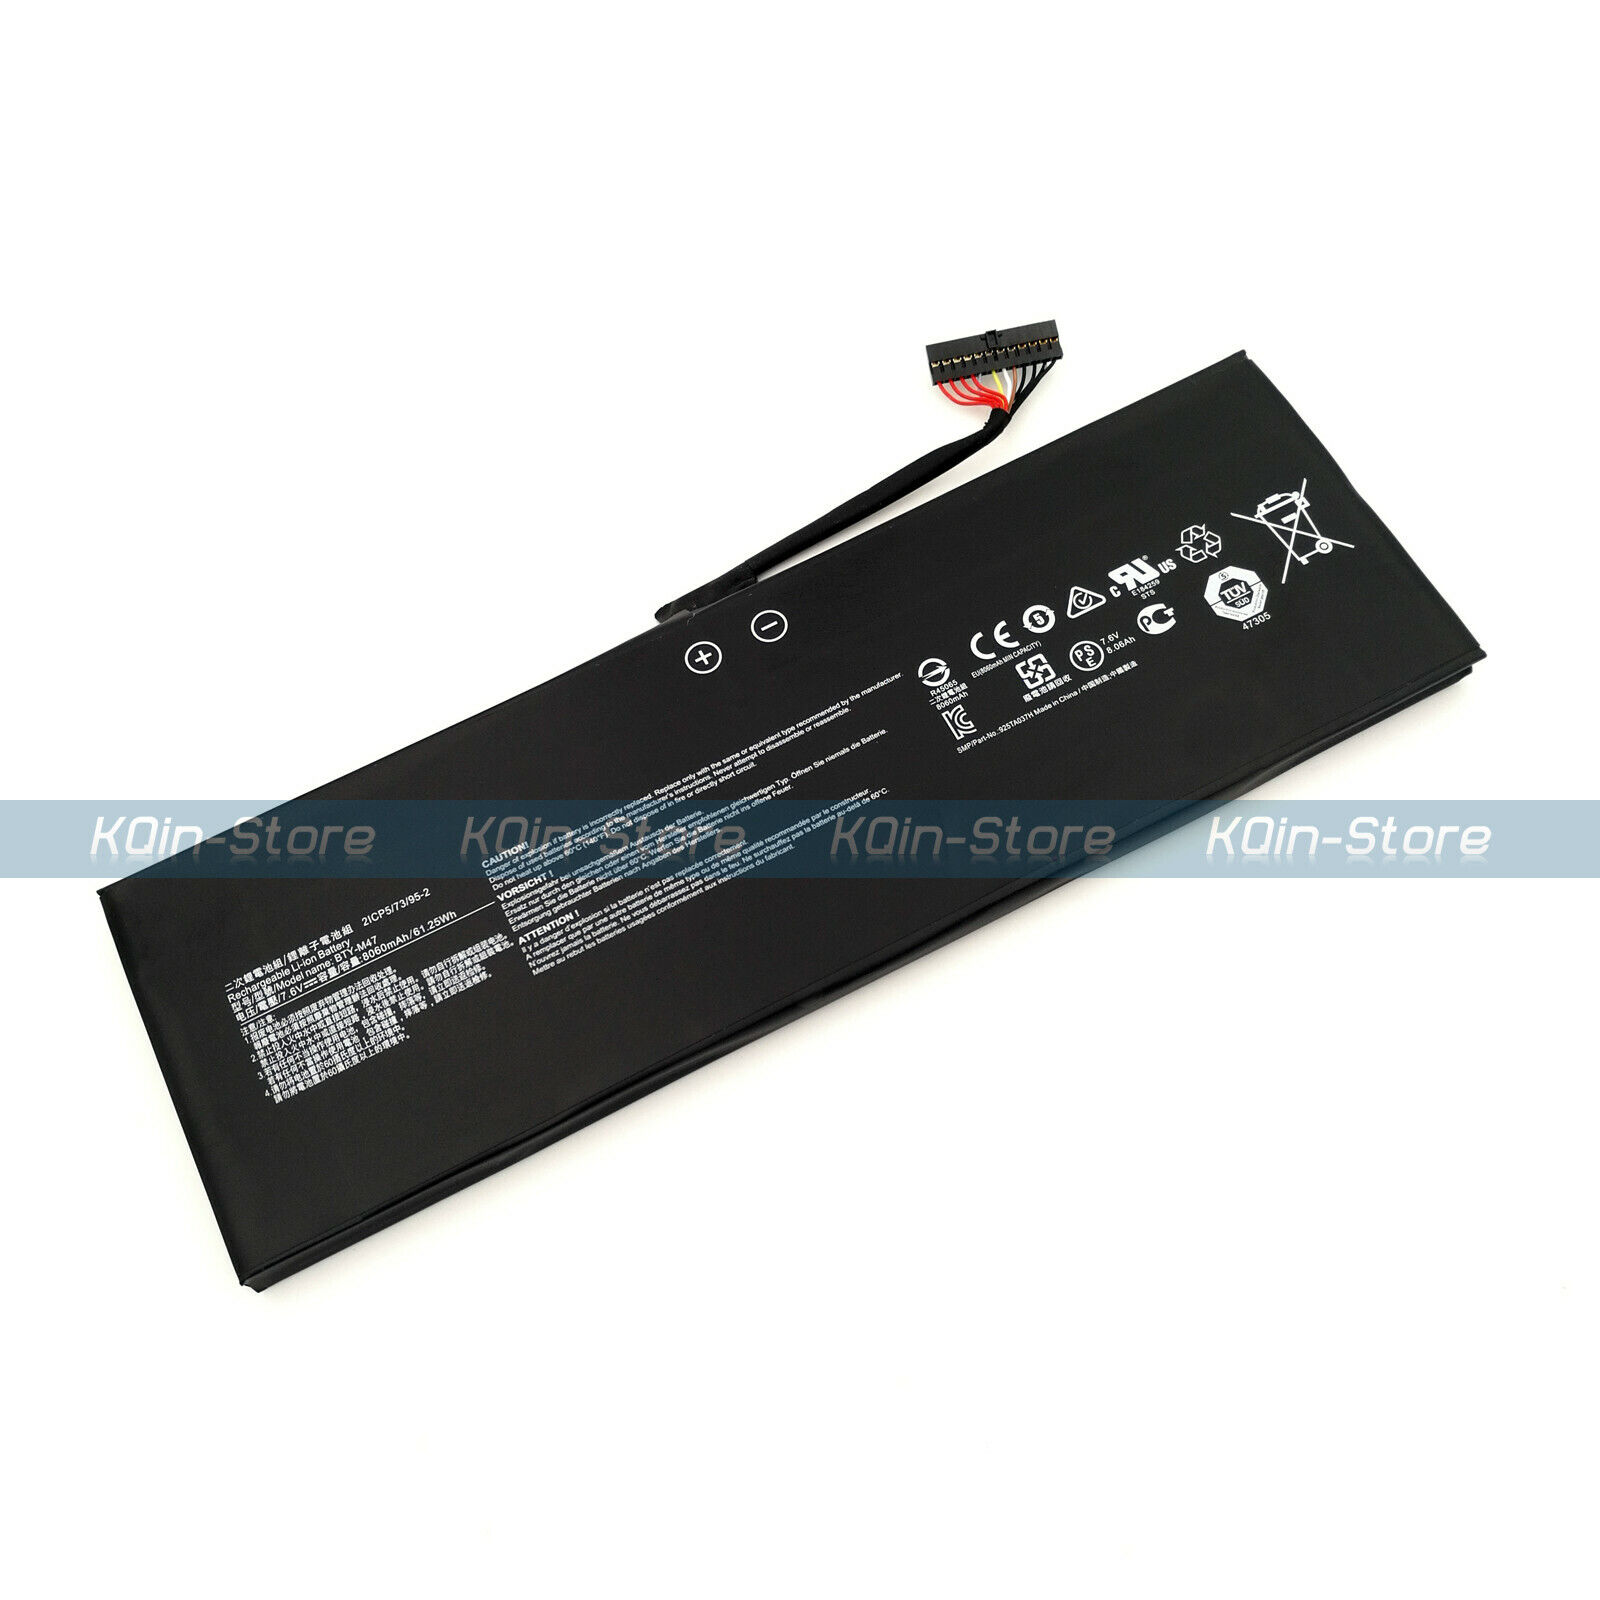 New Genuine BTY-M47 Battery for Msi GS40 6QD 6QE GS43 GS43VR 7RE 6RE MS-14A3 OEM